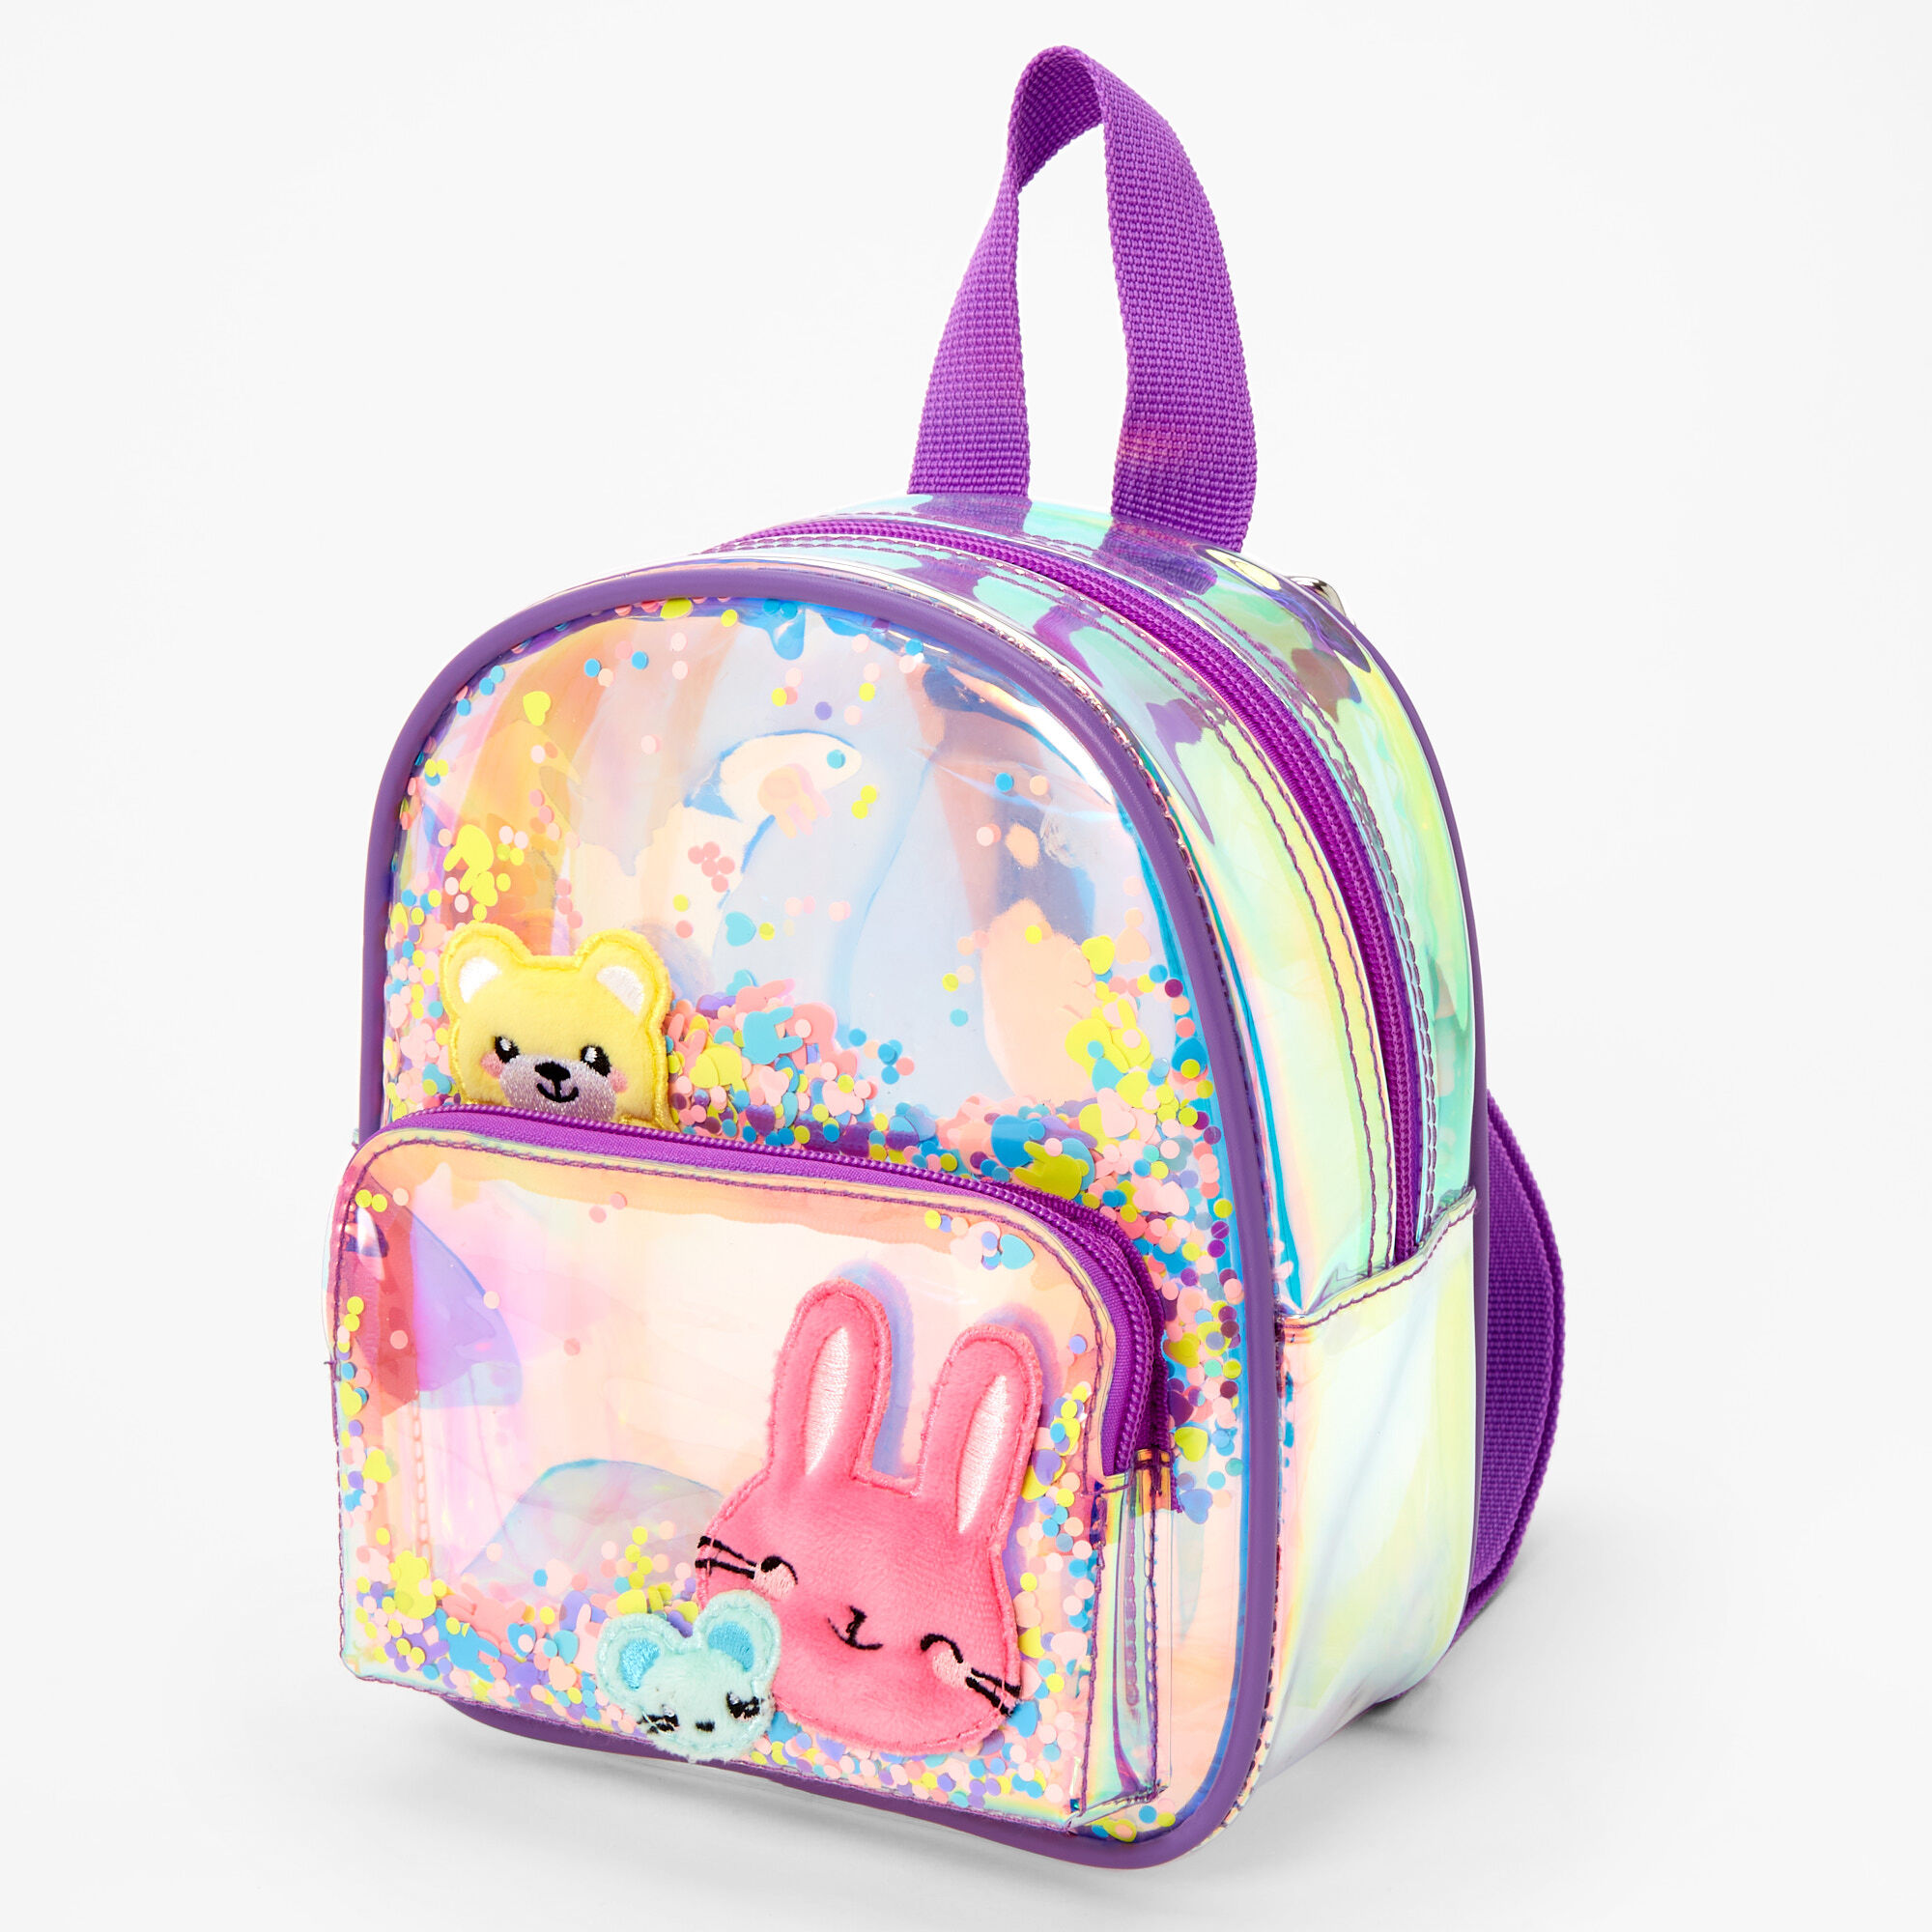 View Claires Club Transparent Confetti Animal Pals Mini Backpack Purple information